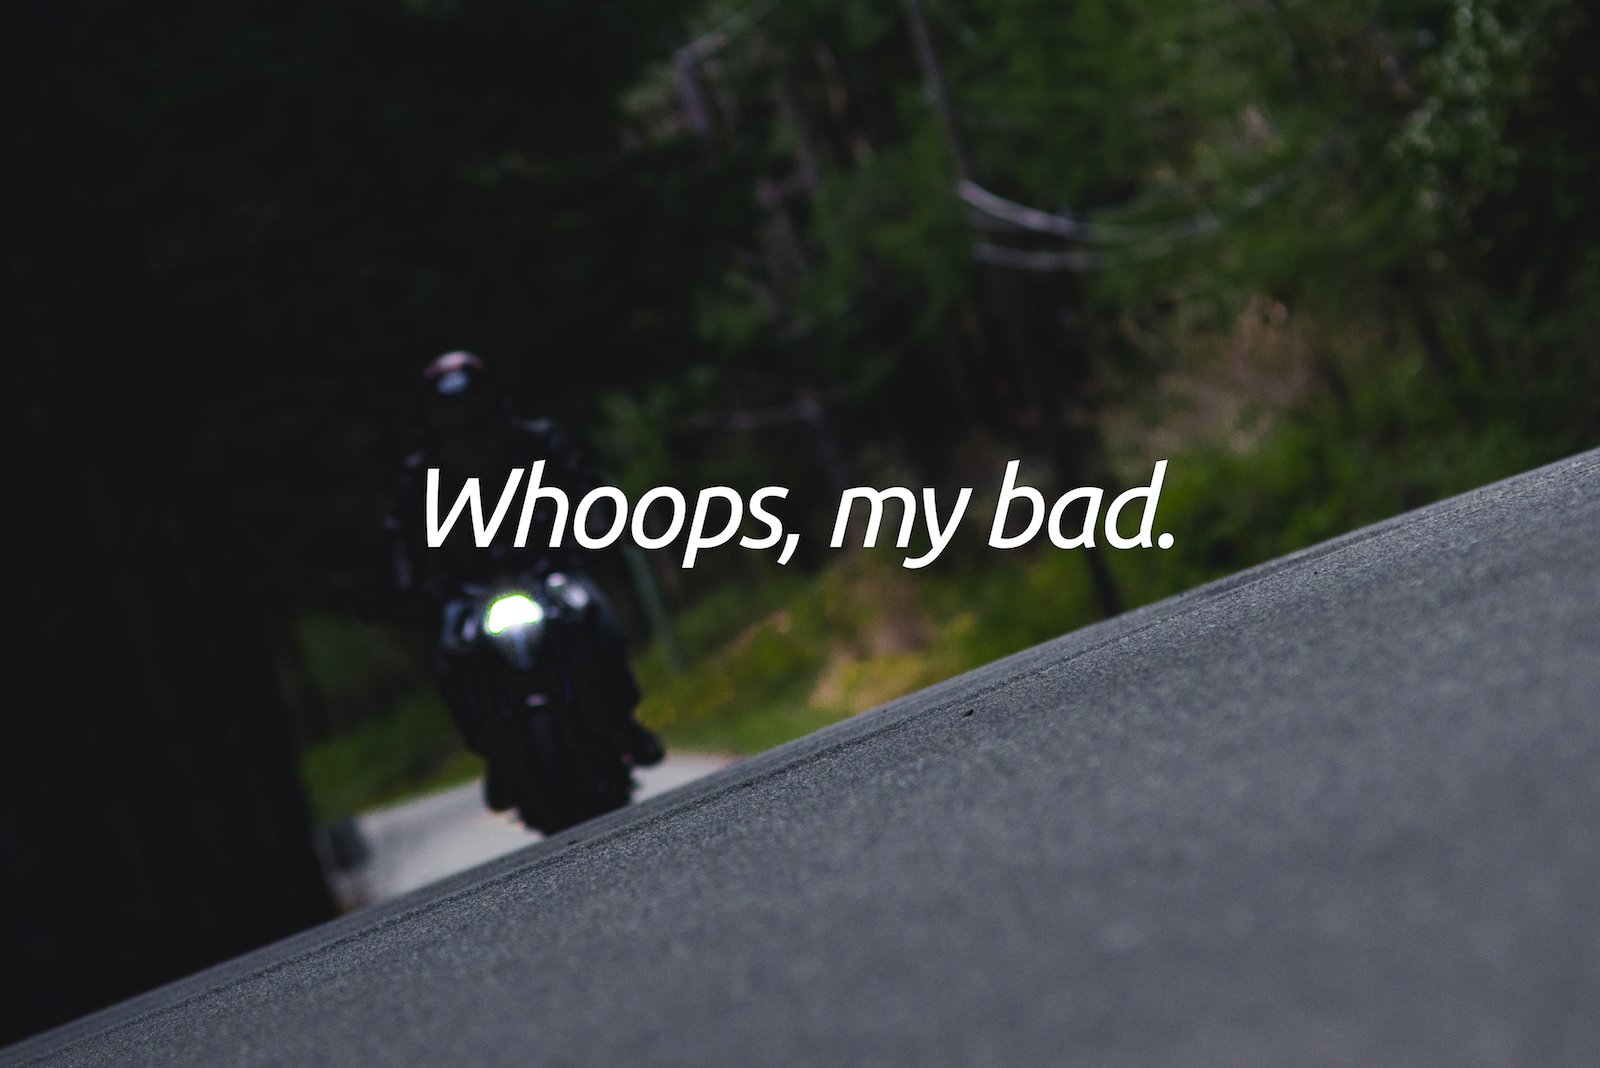 10 Lessons Learned from Botched Motorcycle Photo Shoots